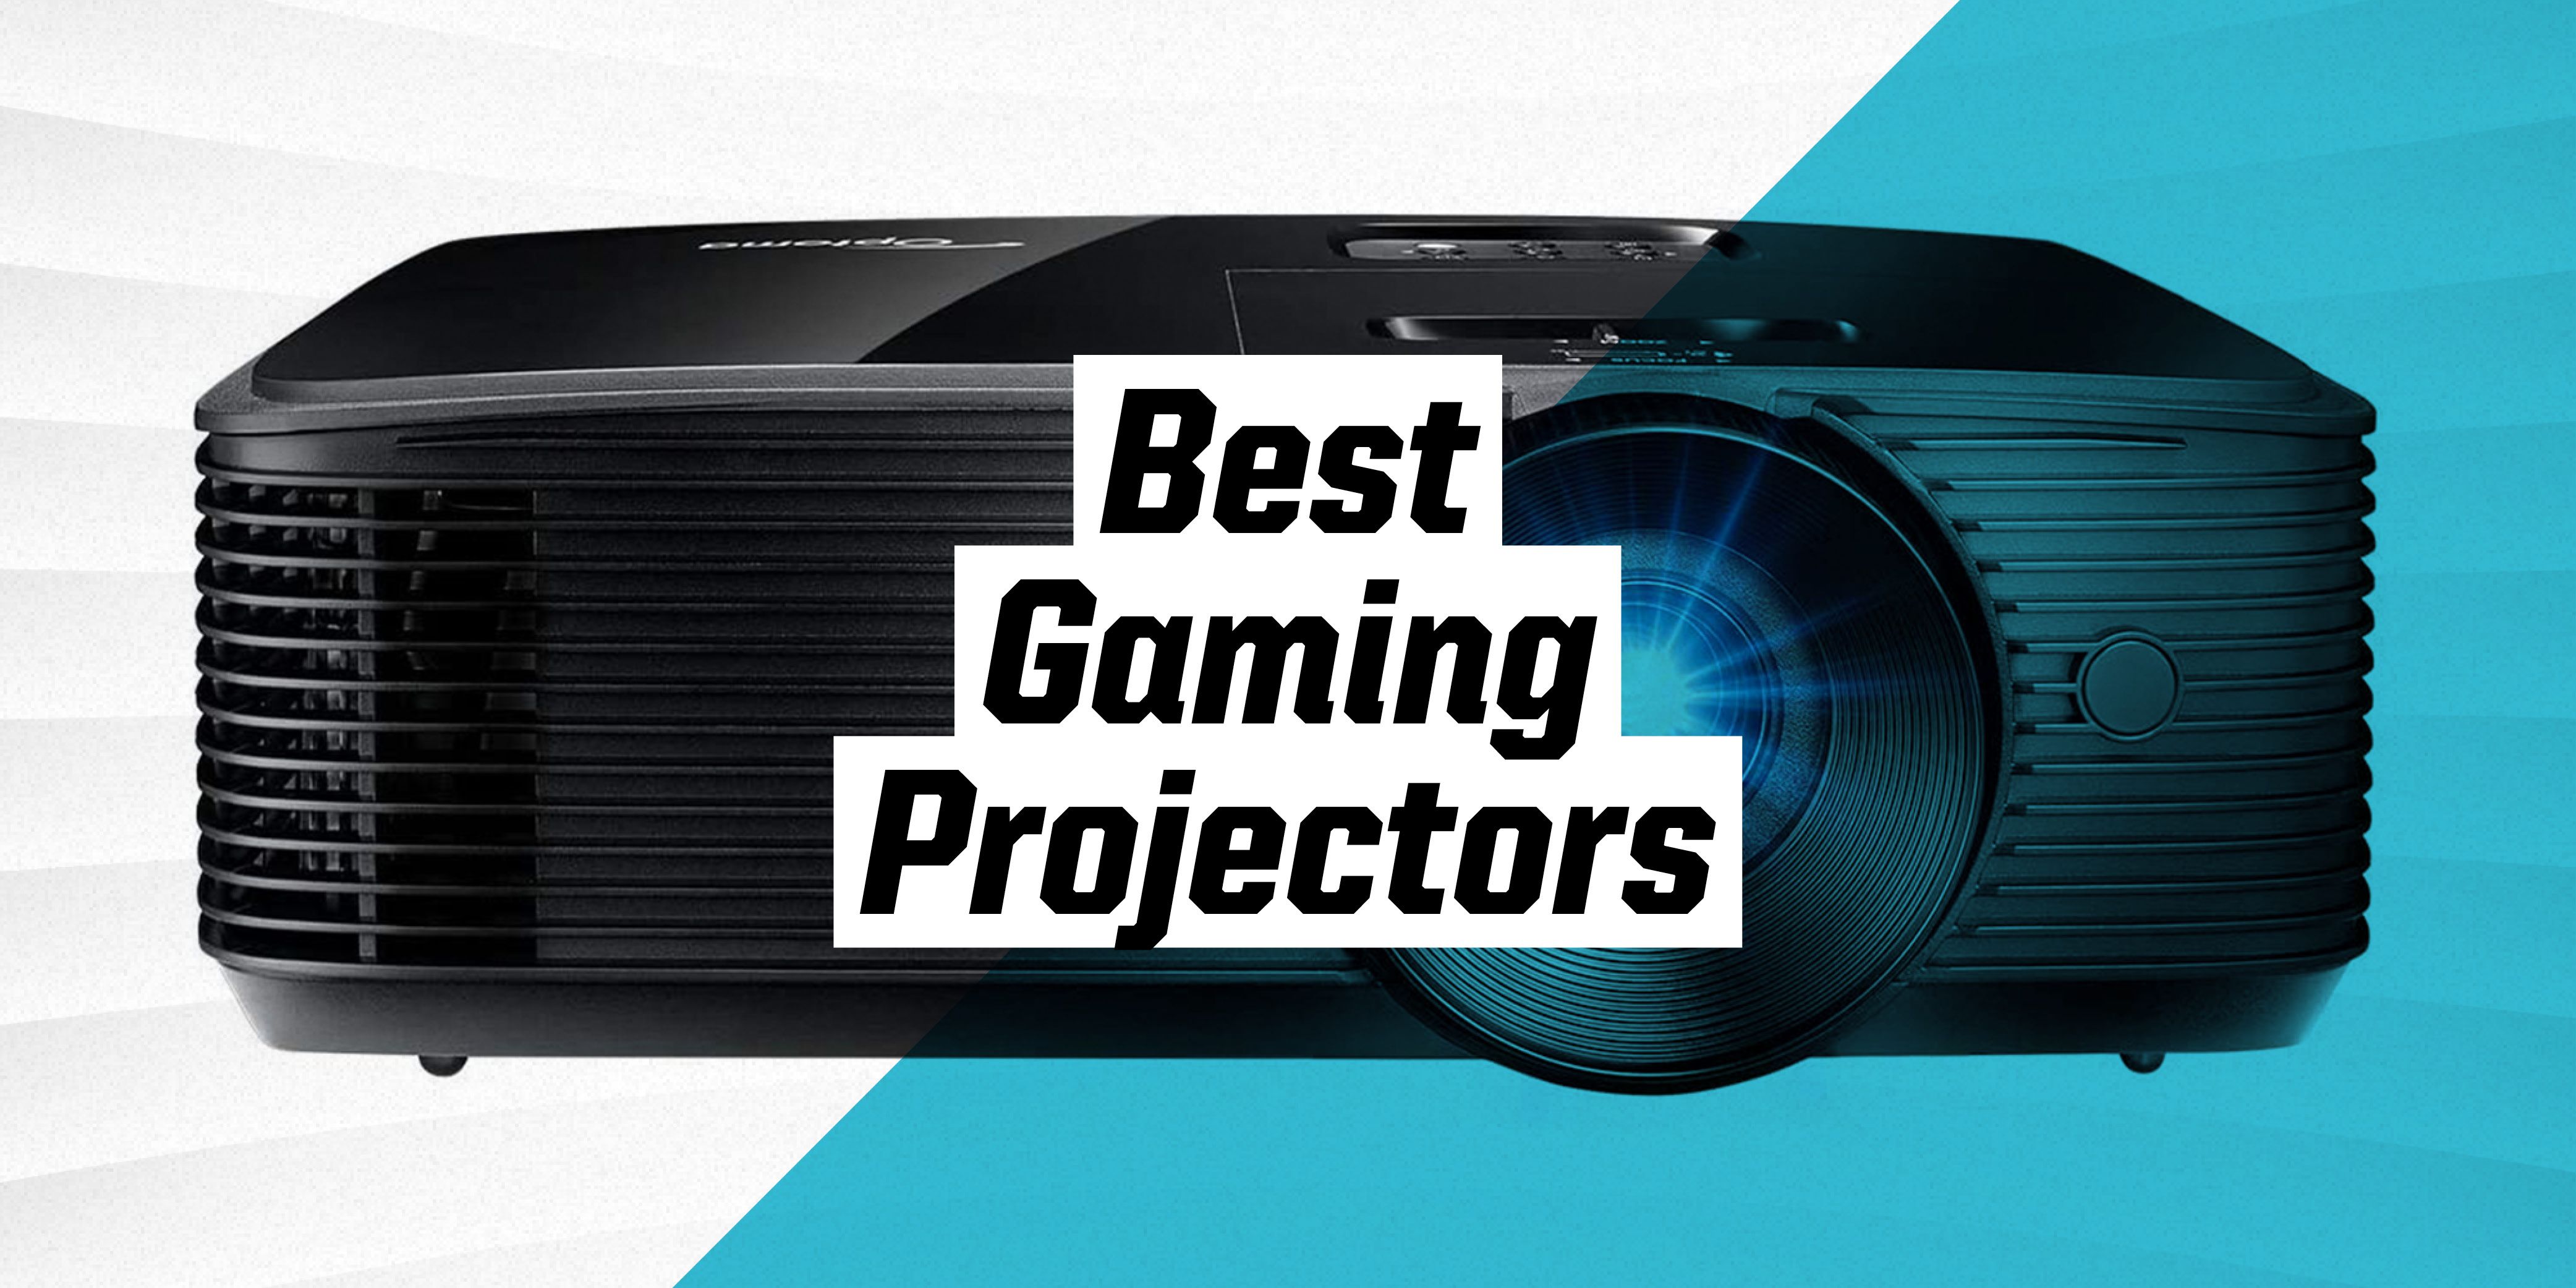 How to Calibrate Your Gaming Projector for the Best Picture?